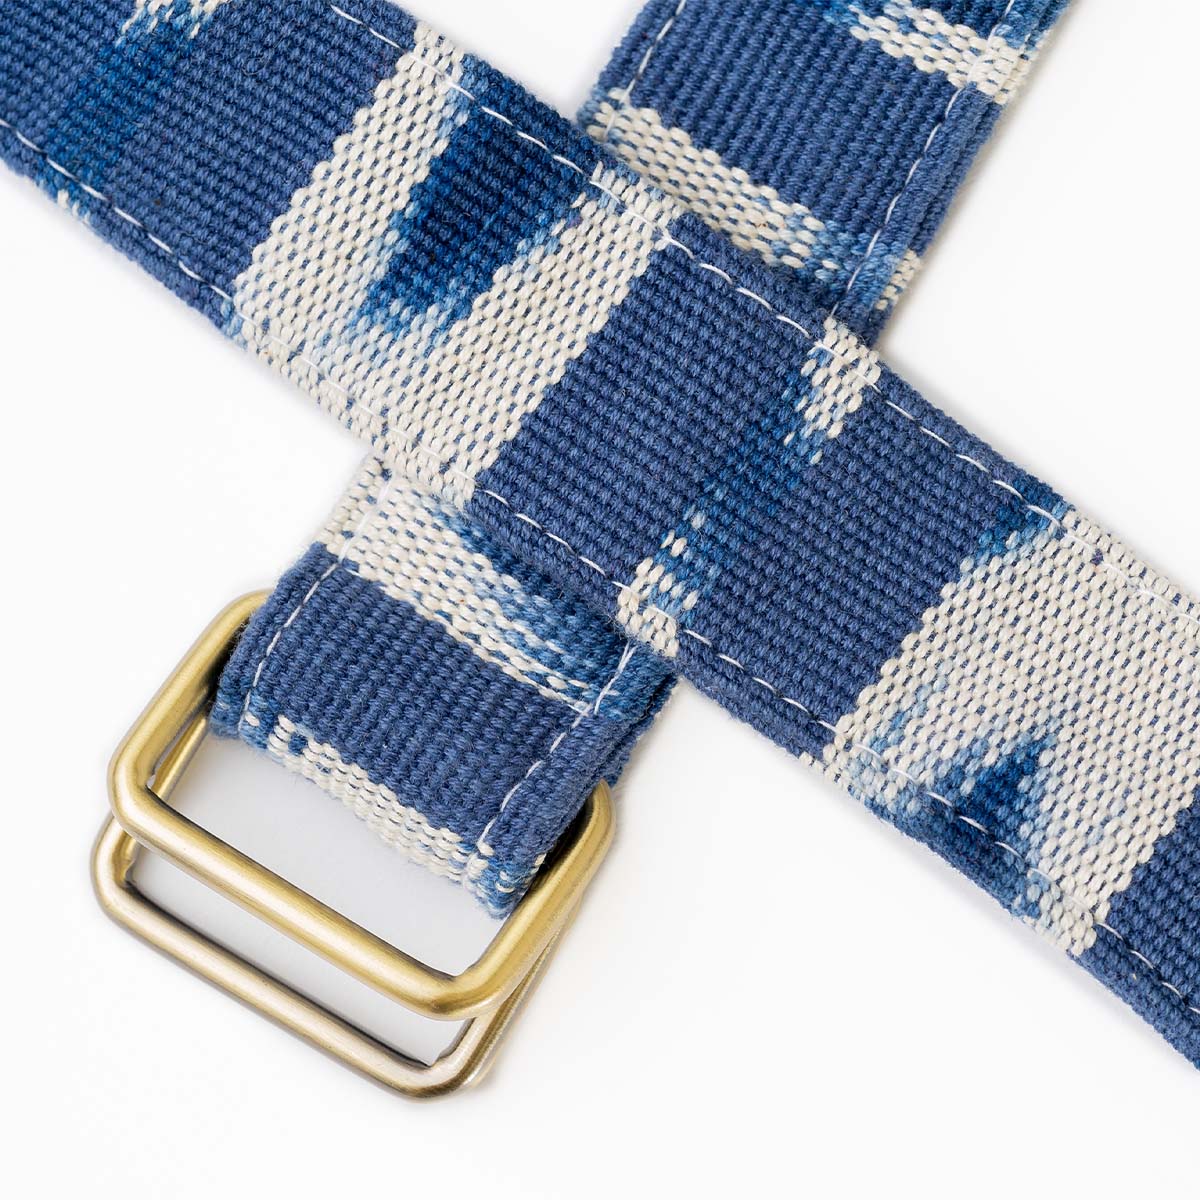 Zoomed-in details of the Celeste Belt in Atitlán Hills pattern, showing the belt buckle. It has vertical and chevron dark blue and white stripes.